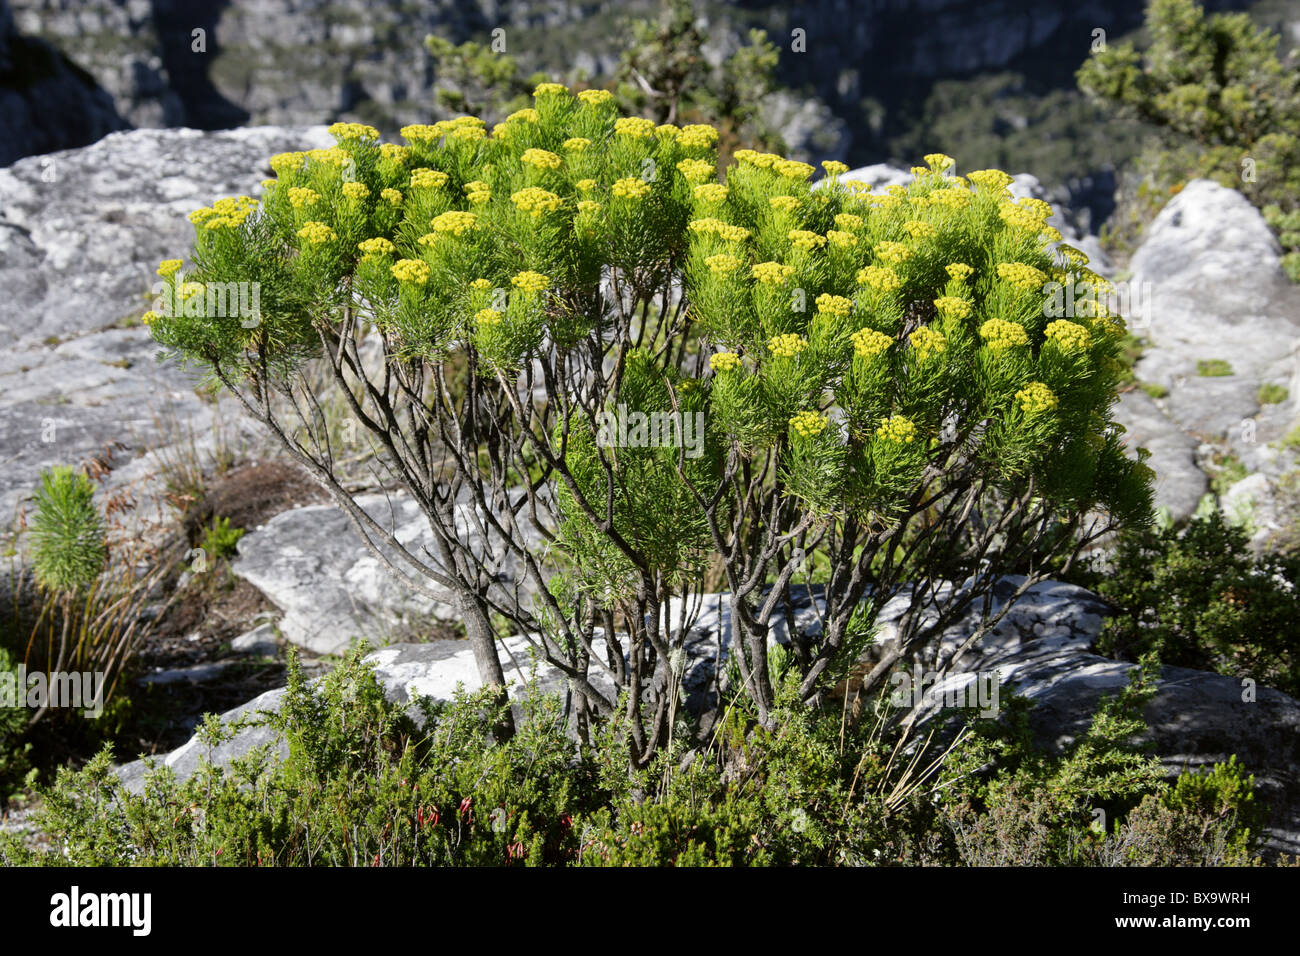 Golden Coulter Bush, Hymenolepis parviflora (syn. Athanasia parviflora), Asteraceae. Table Mountain, South Africa. Stock Photo